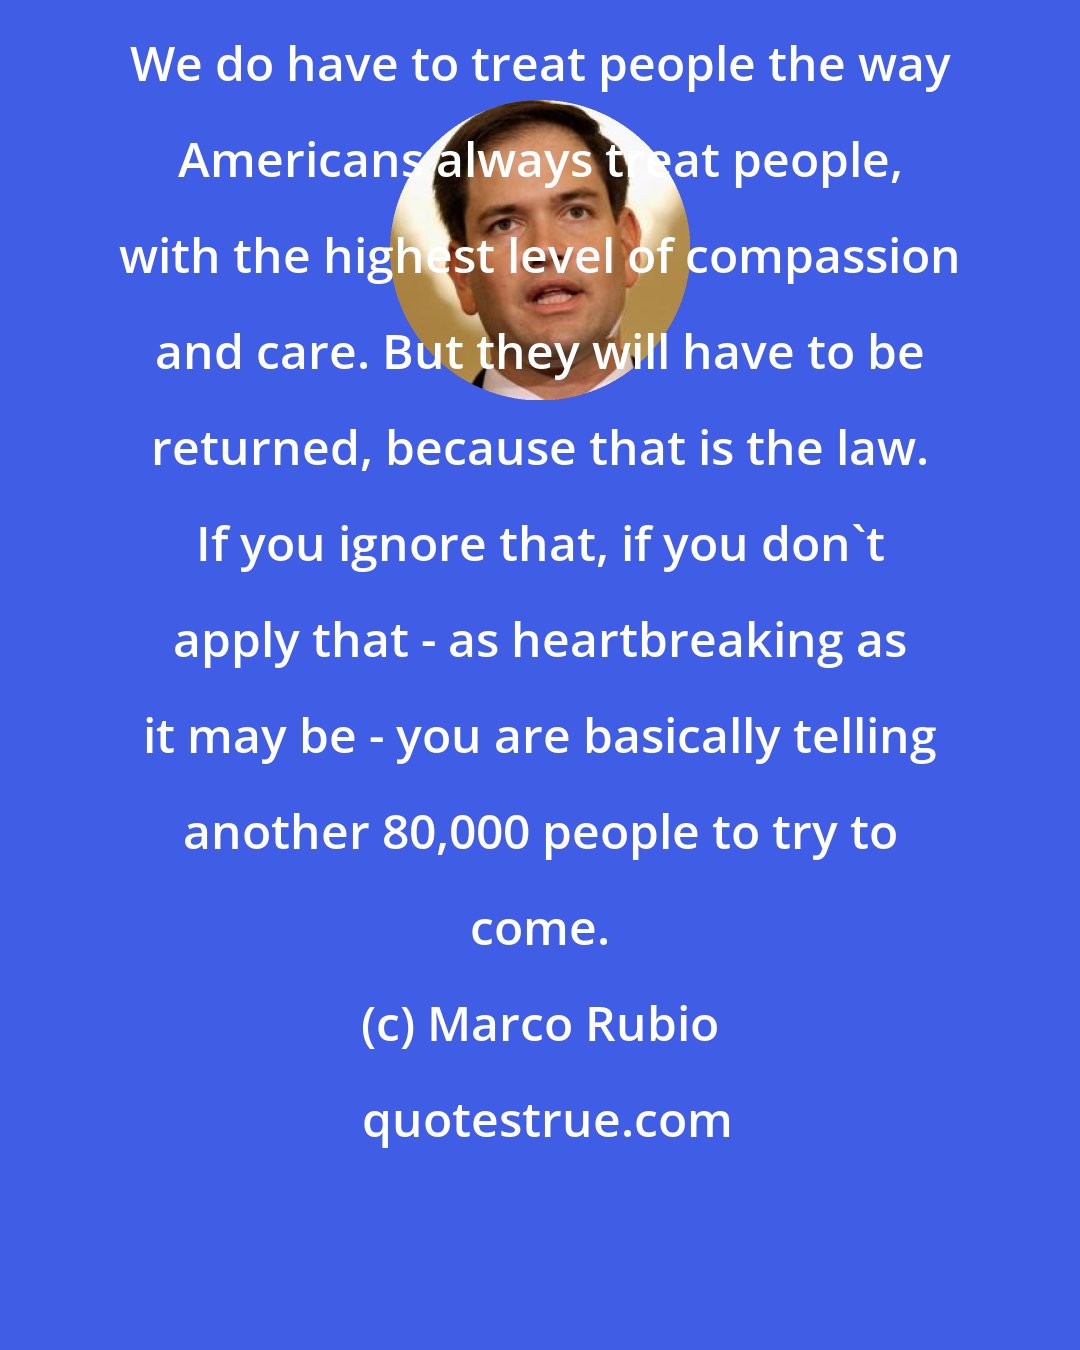 Marco Rubio: We do have to treat people the way Americans always treat people, with the highest level of compassion and care. But they will have to be returned, because that is the law. If you ignore that, if you don't apply that - as heartbreaking as it may be - you are basically telling another 80,000 people to try to come.